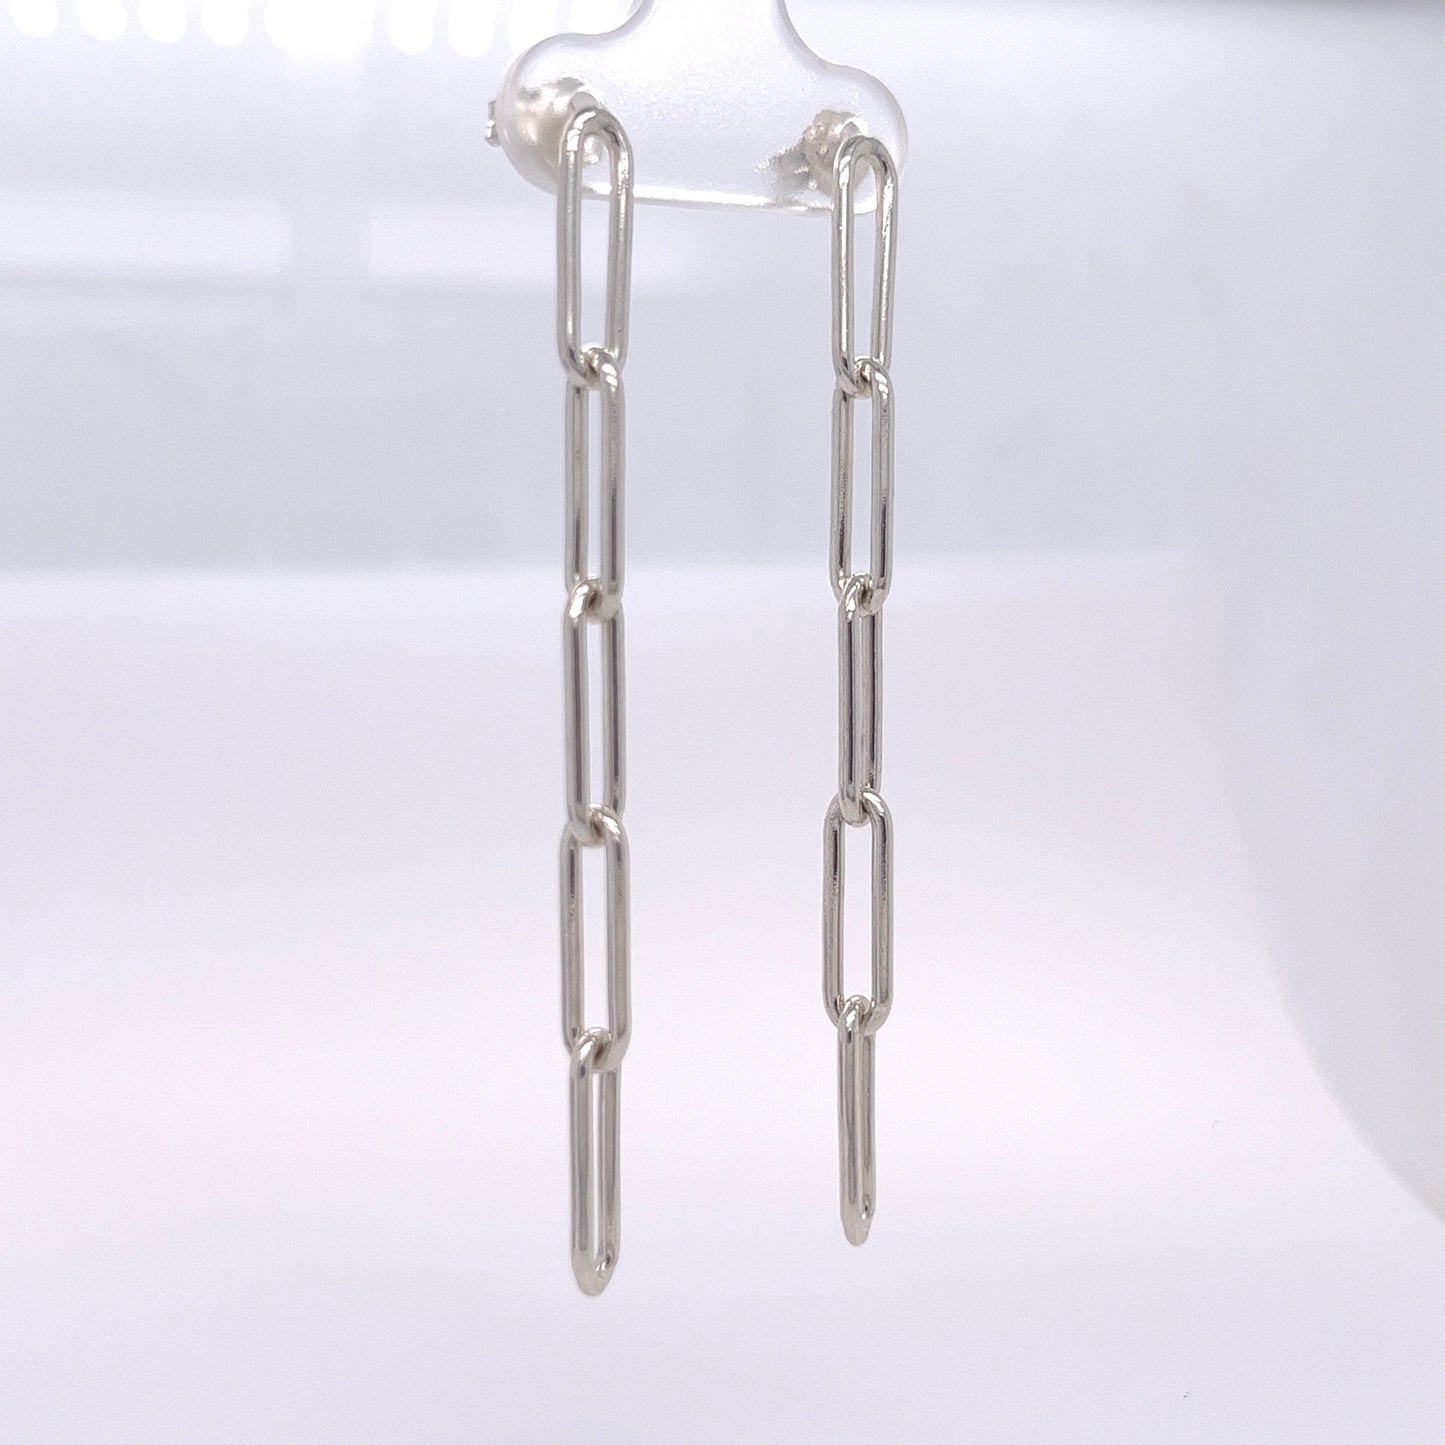 The Paperclip Earrings